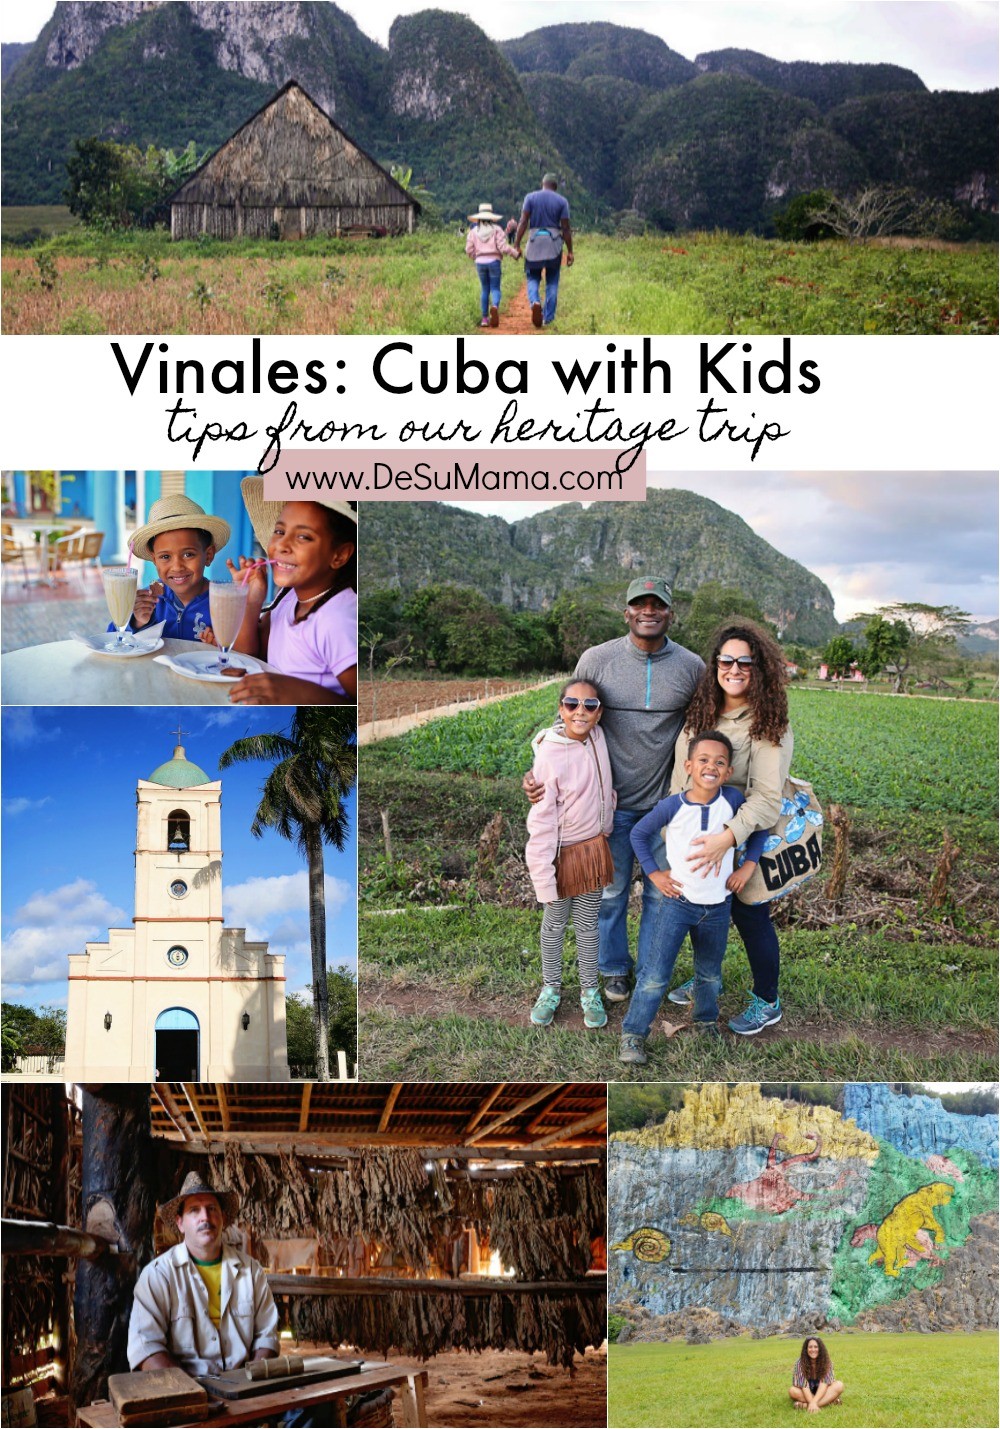 vinales, cuba with kids, family travel adventure